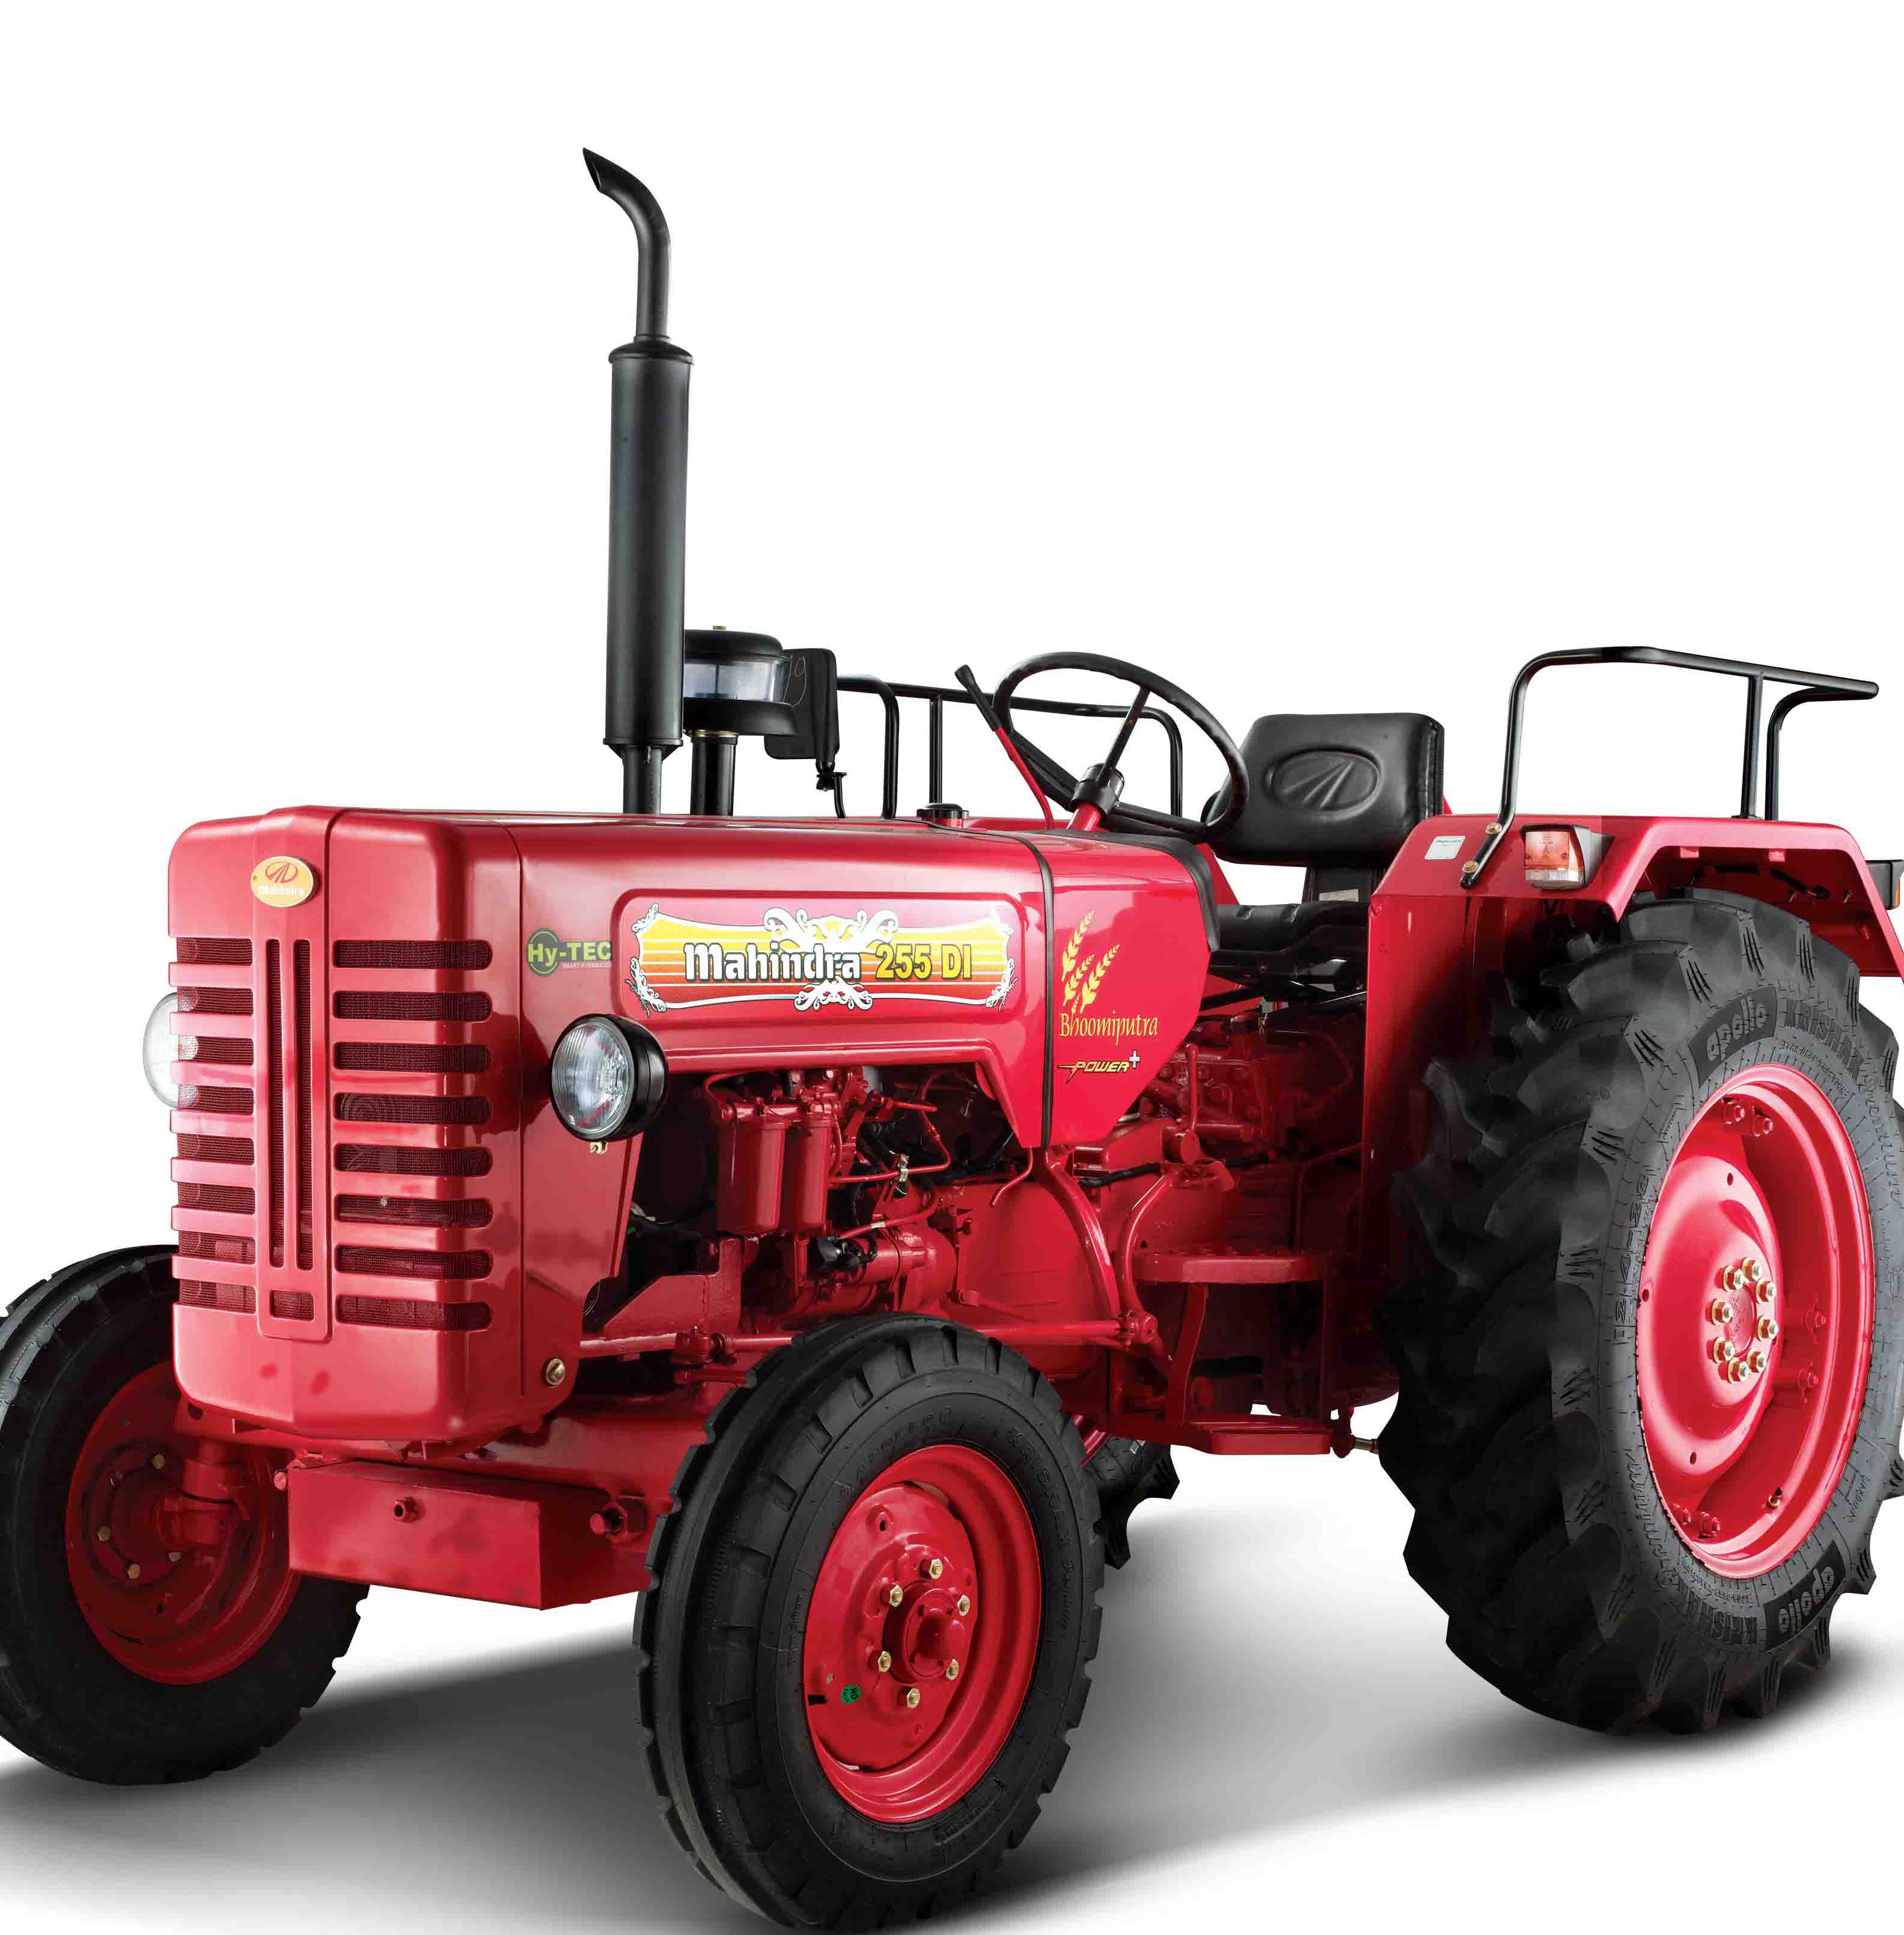 Mahindra Tractors Price List In India Of All Models 2018 